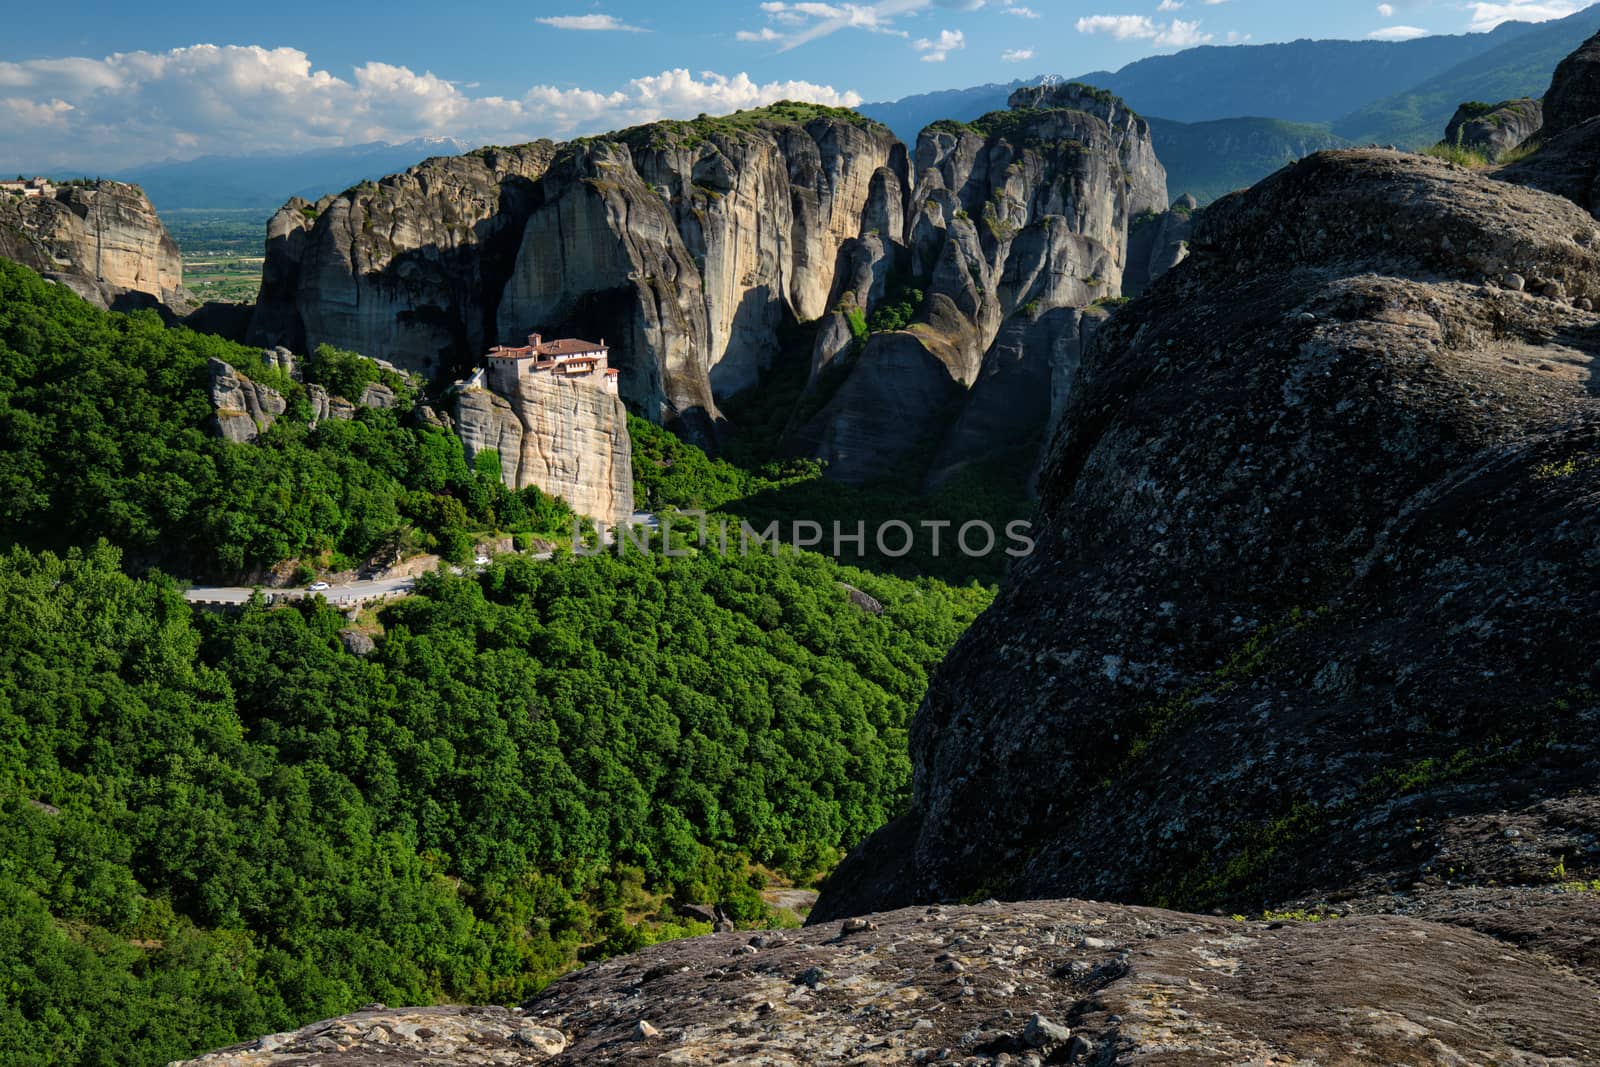 Monastery of Rousanou and Monastery of St. Stephen in Meteora in Greece by dimol